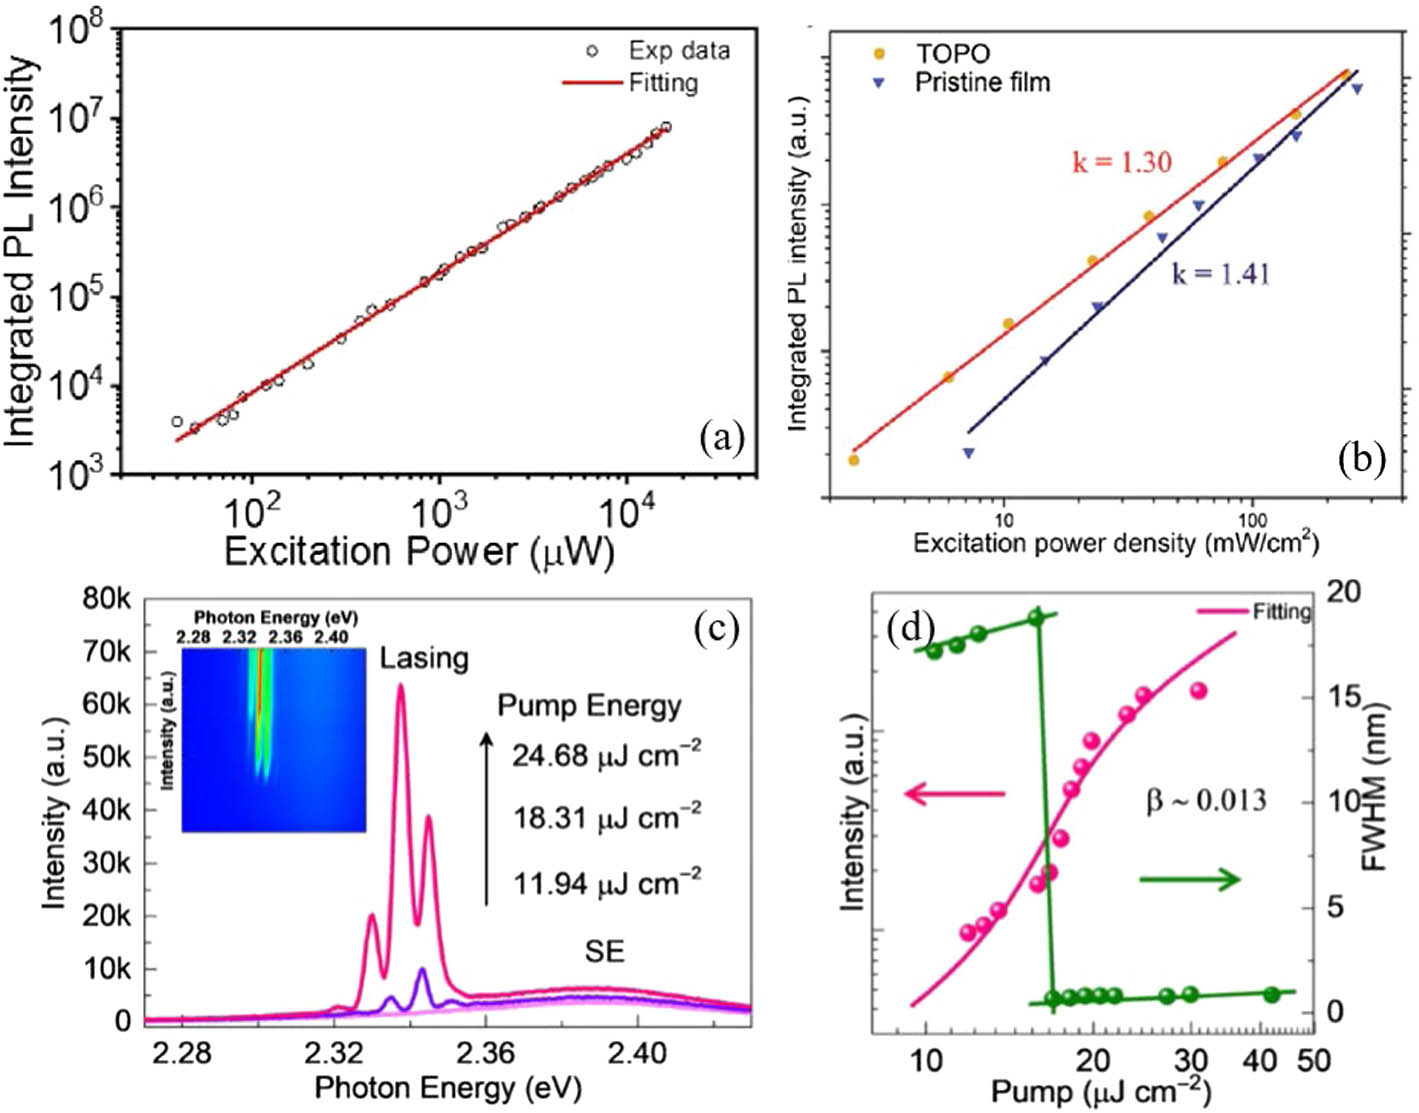 (a) Integrated PL intensity linearly increasing with excitation power in CsPbBr3 NCs. Reprinted with permission [27]. (b) Fitting results of excitation density dependent PL spectra of the pristine and TOPO-treated CsPbBr3 perovskite films. Reprinted with permission [46]. (c) Power-dependent emission spectra indicating lasing of CsPbBr3 nanowires. Inset: a two-dimensional pseudo-color plot of emission spectra at different pump fluences. (d) The power dependence of the integrated emission intensity and the FWHM of the dominant emitted lasing peak. Reprinted with permission [47].